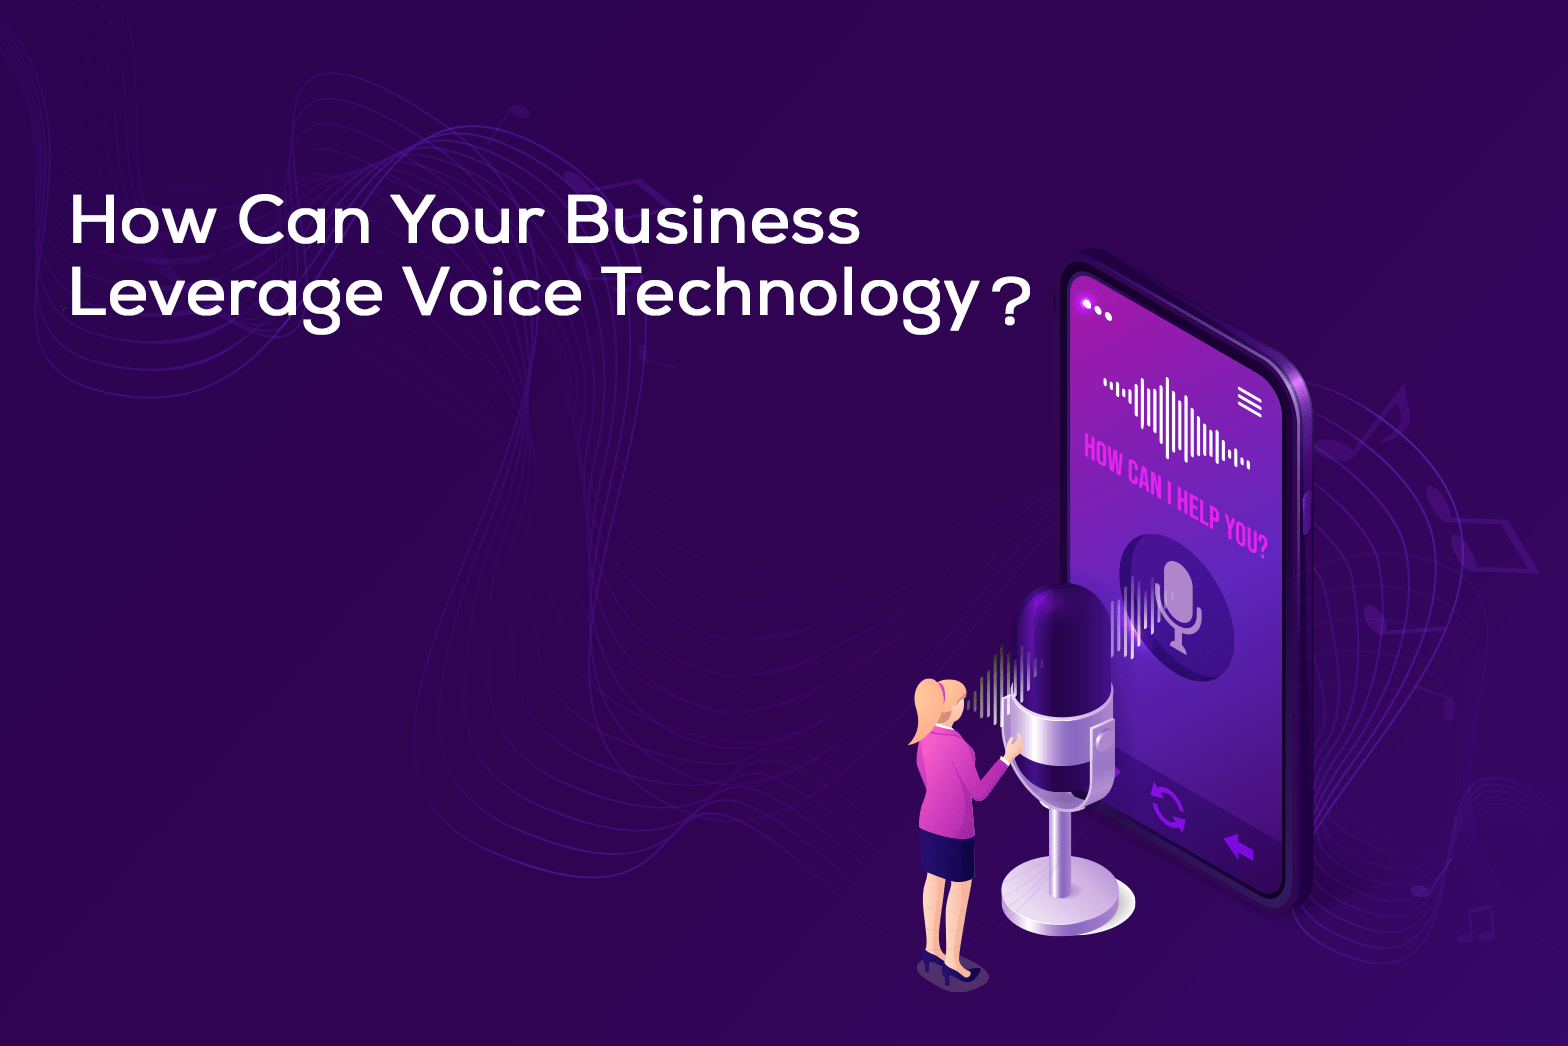 How Can Your Business Leverage Voice Technology?